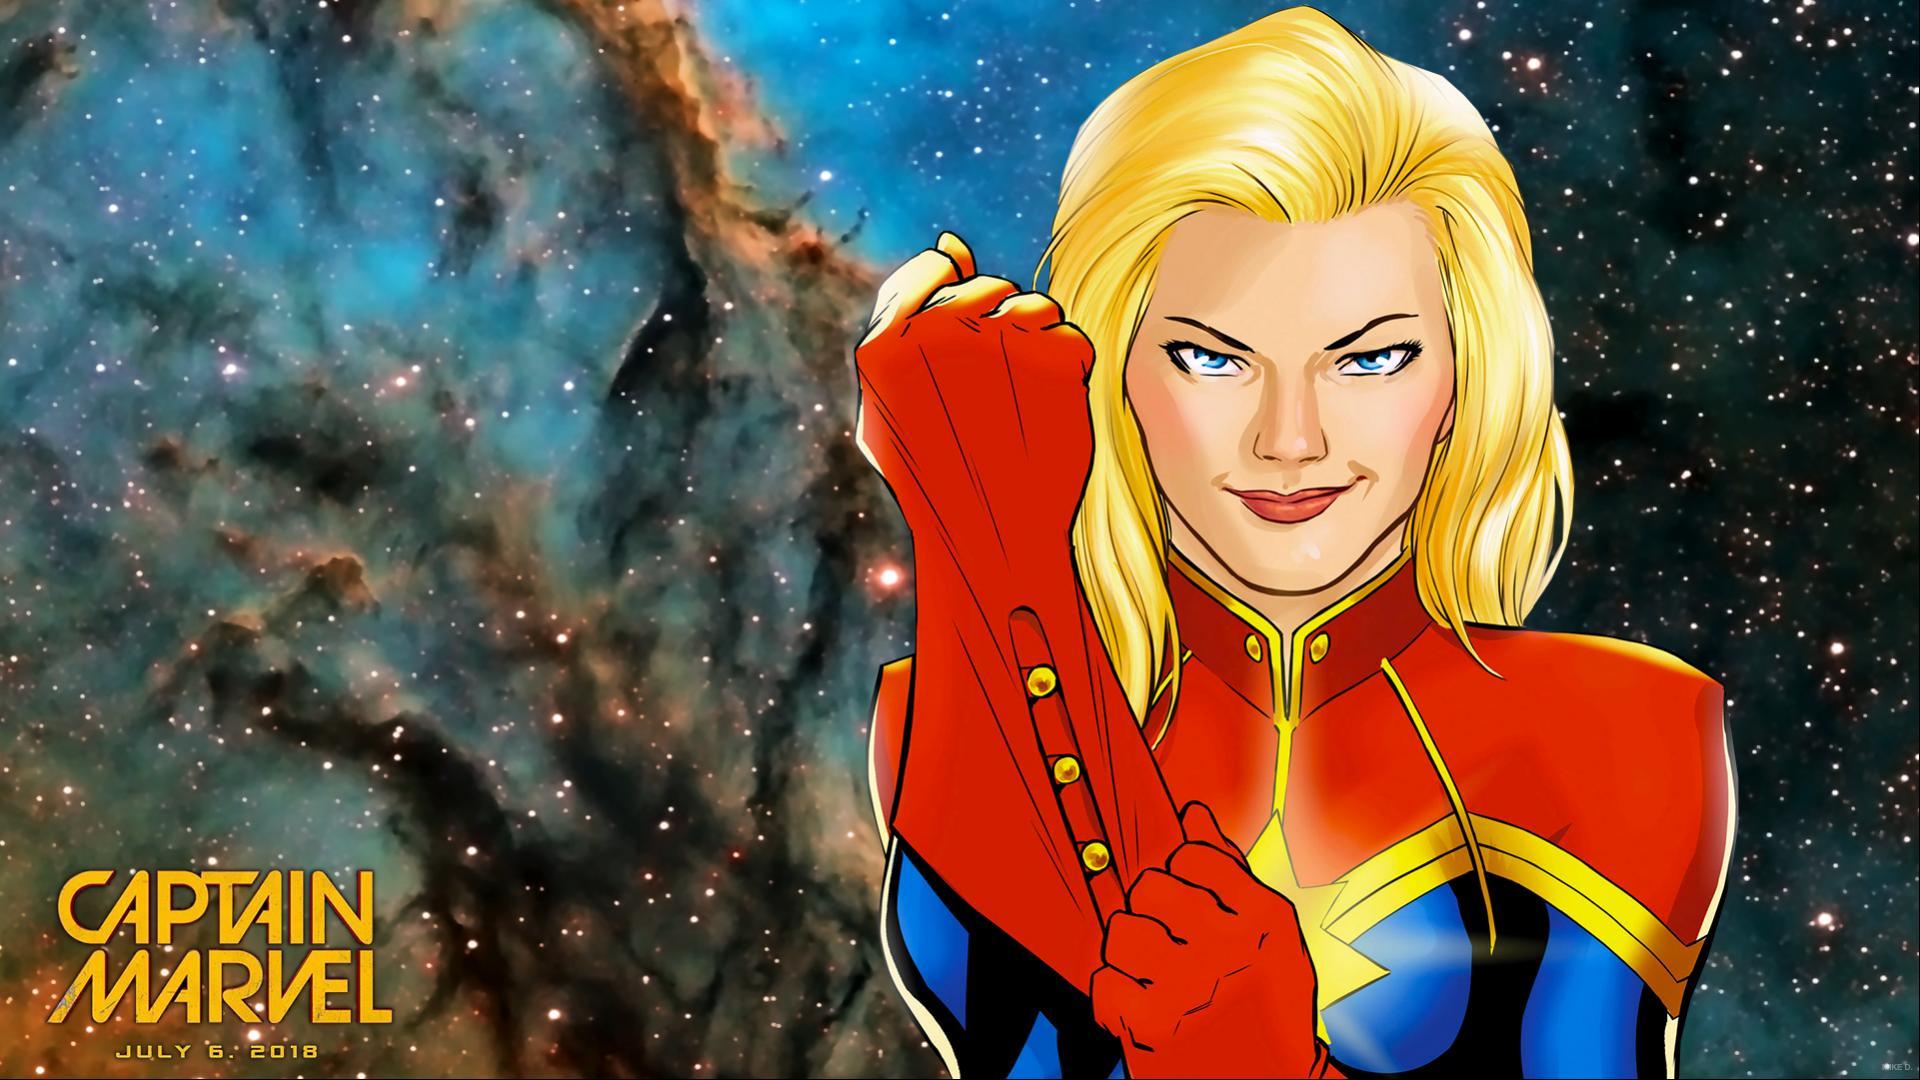 HD Wallpapers p with Superheroes – Captain Marvel